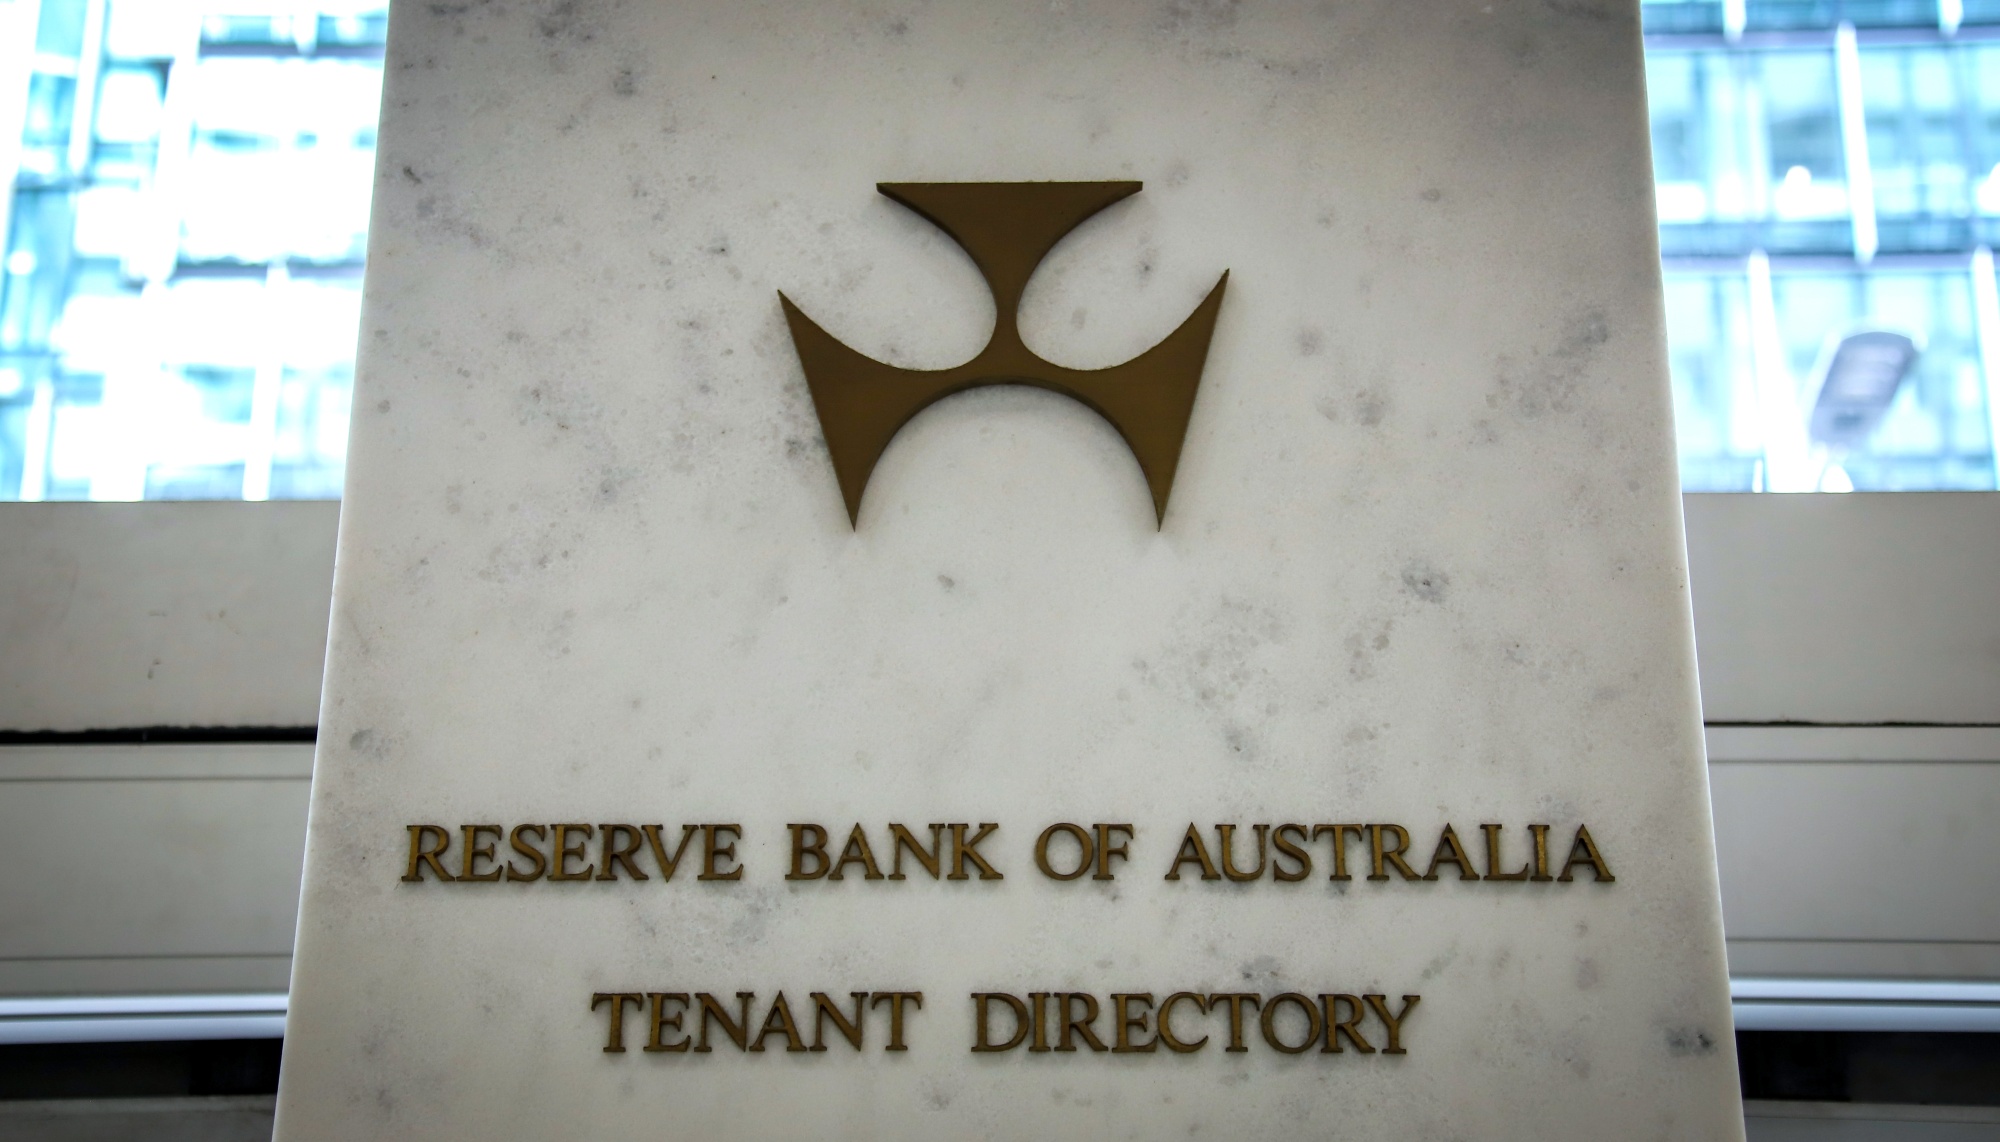 Australia’s Central Bank Is ‘Dysfunctional,’ Ex-Researcher Says